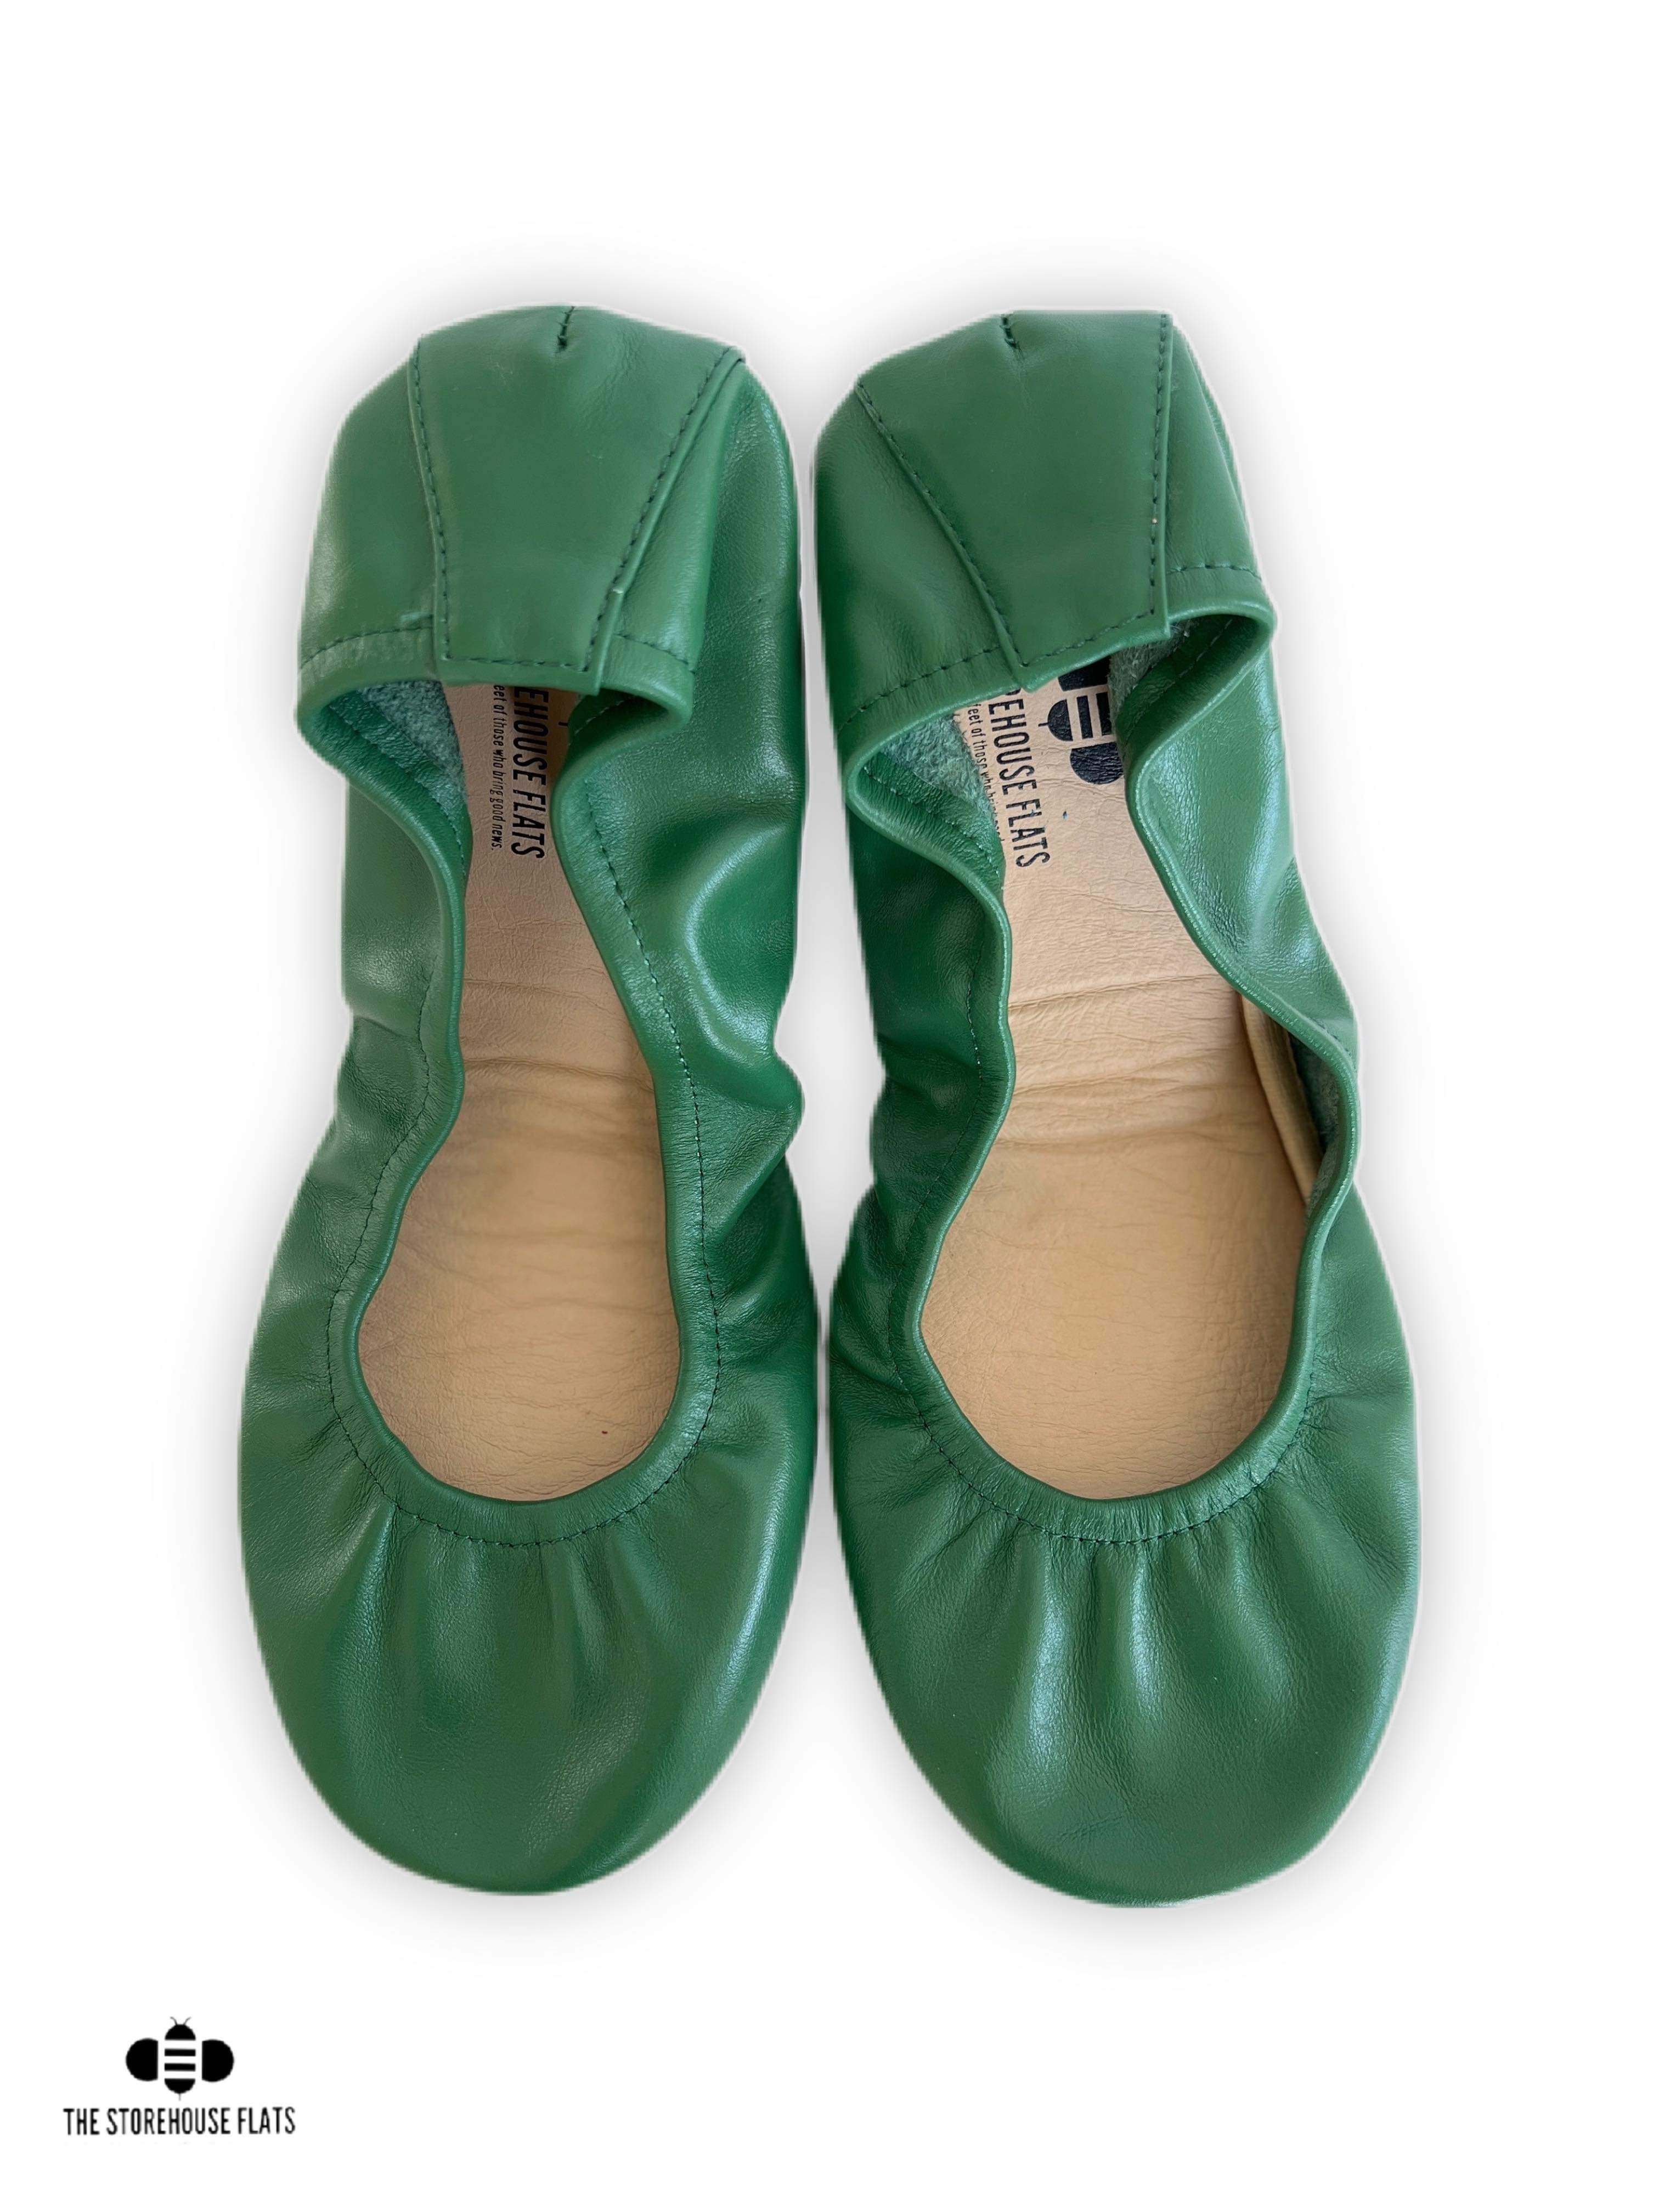 KELLY GREEN CLASSIC | IN STOCK